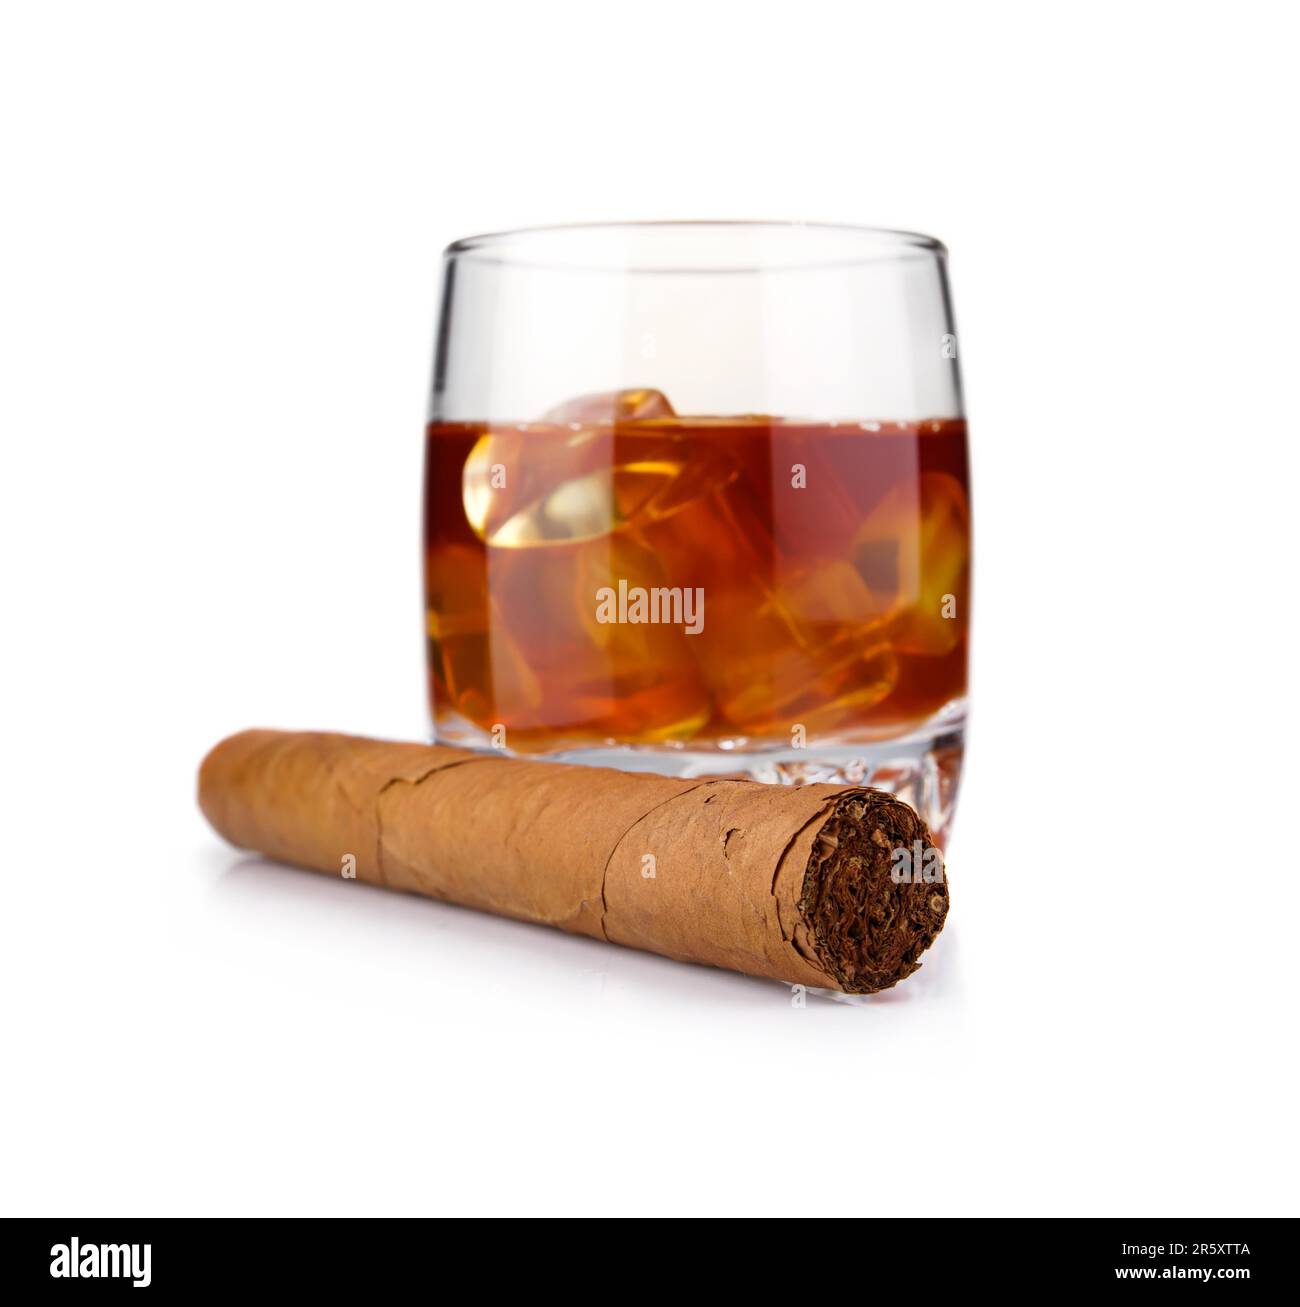 https://c8.alamy.com/comp/2R5XTTA/glass-of-whiskey-with-ice-cubes-and-havana-cigar-isolated-on-white-background-2R5XTTA.jpg